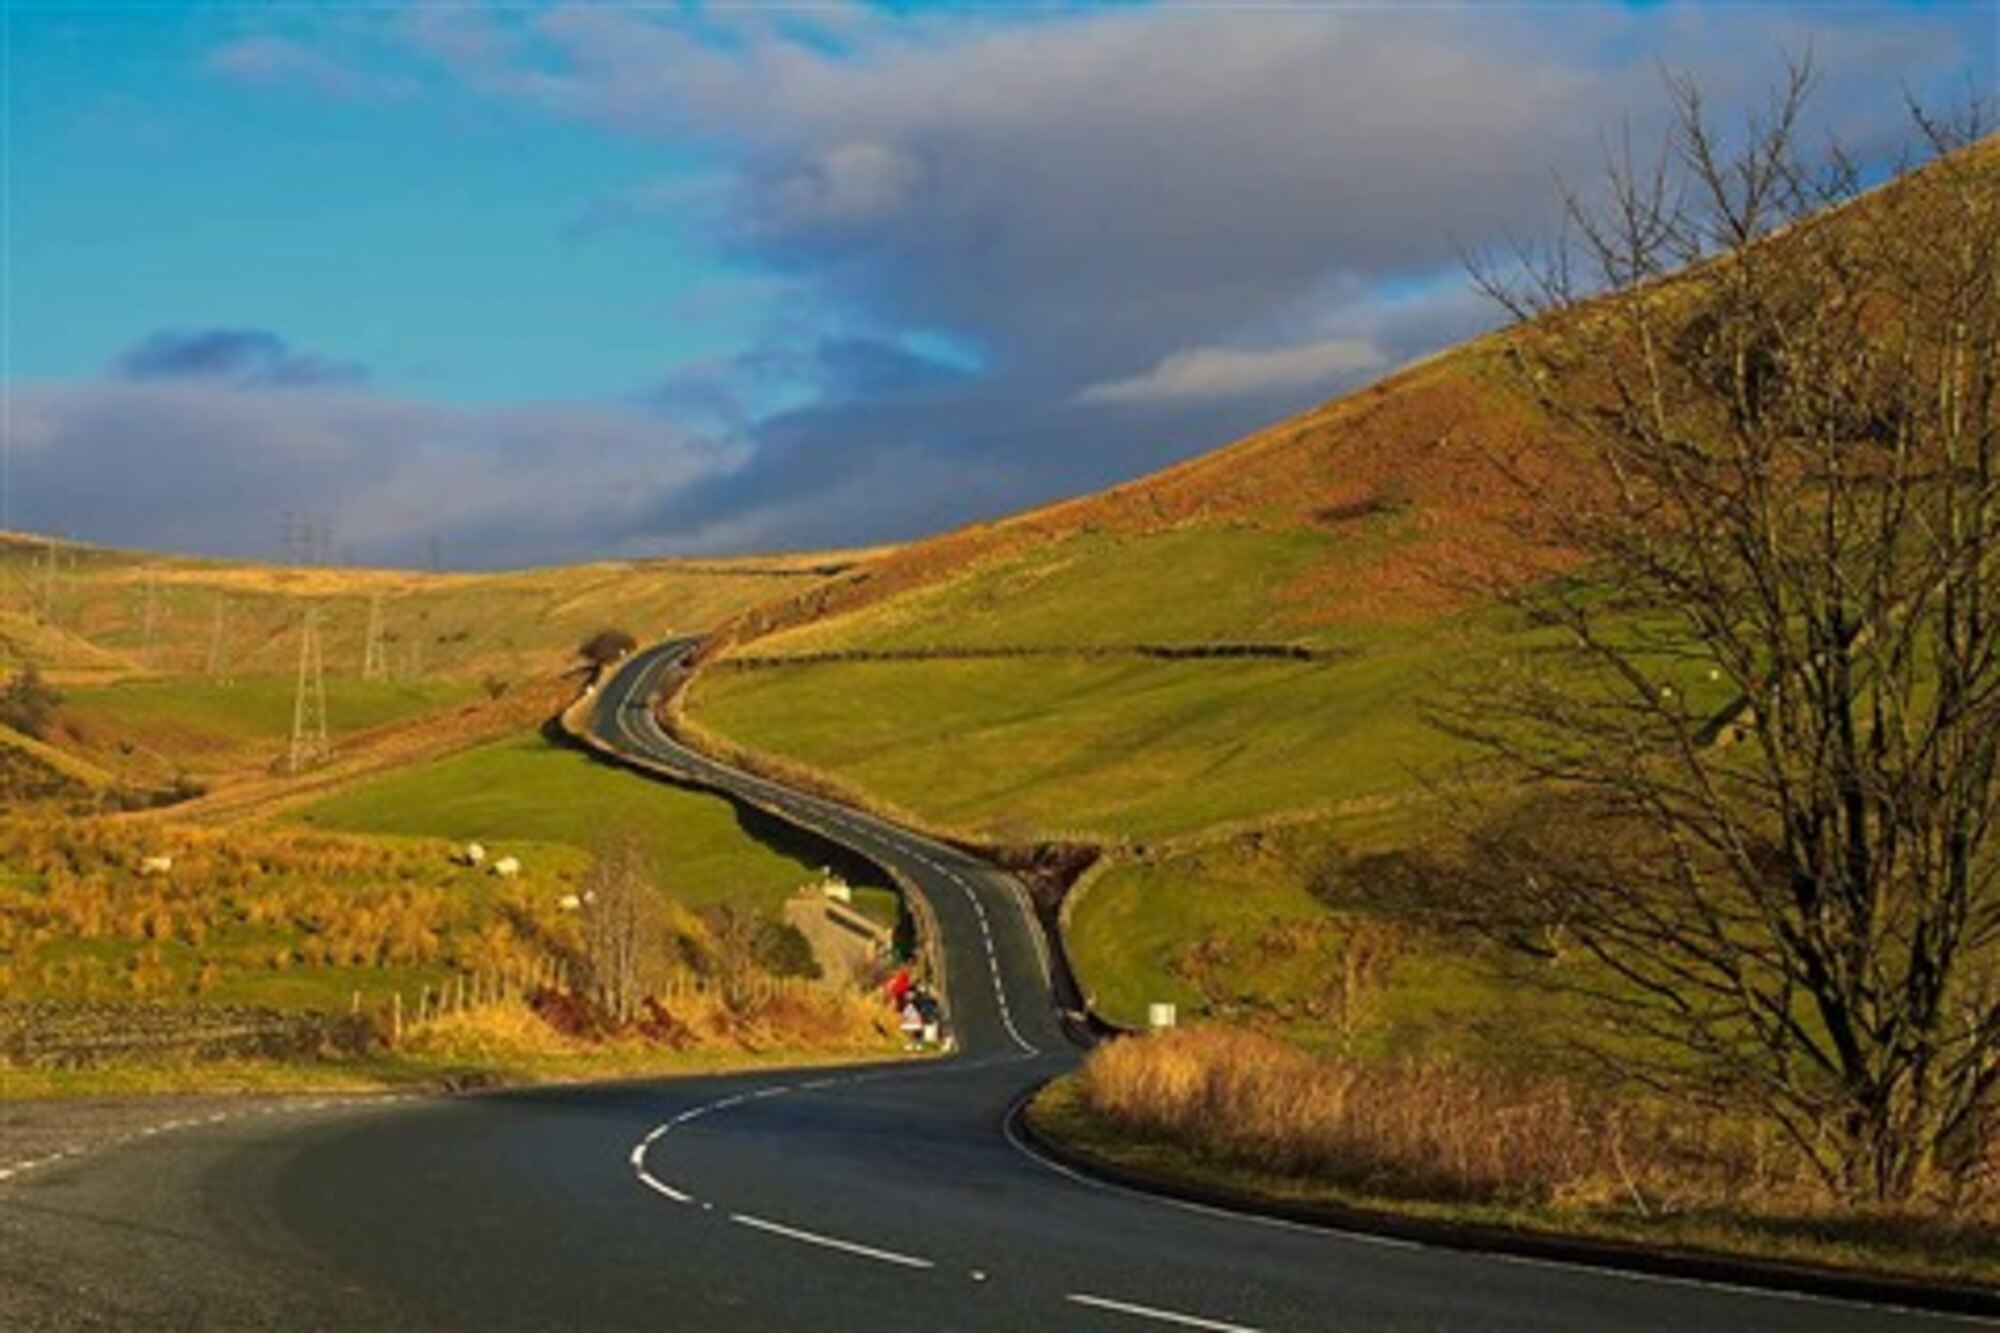 One of the most dangerous aspects of living in the United Kingdom is driving. The roads are considerably smaller and older than typical roads in the U.S.A solid knowledge of how to drive in bad weather can greatly reduce your risk level while driving in dangerous conditions. (Courtesy photo)